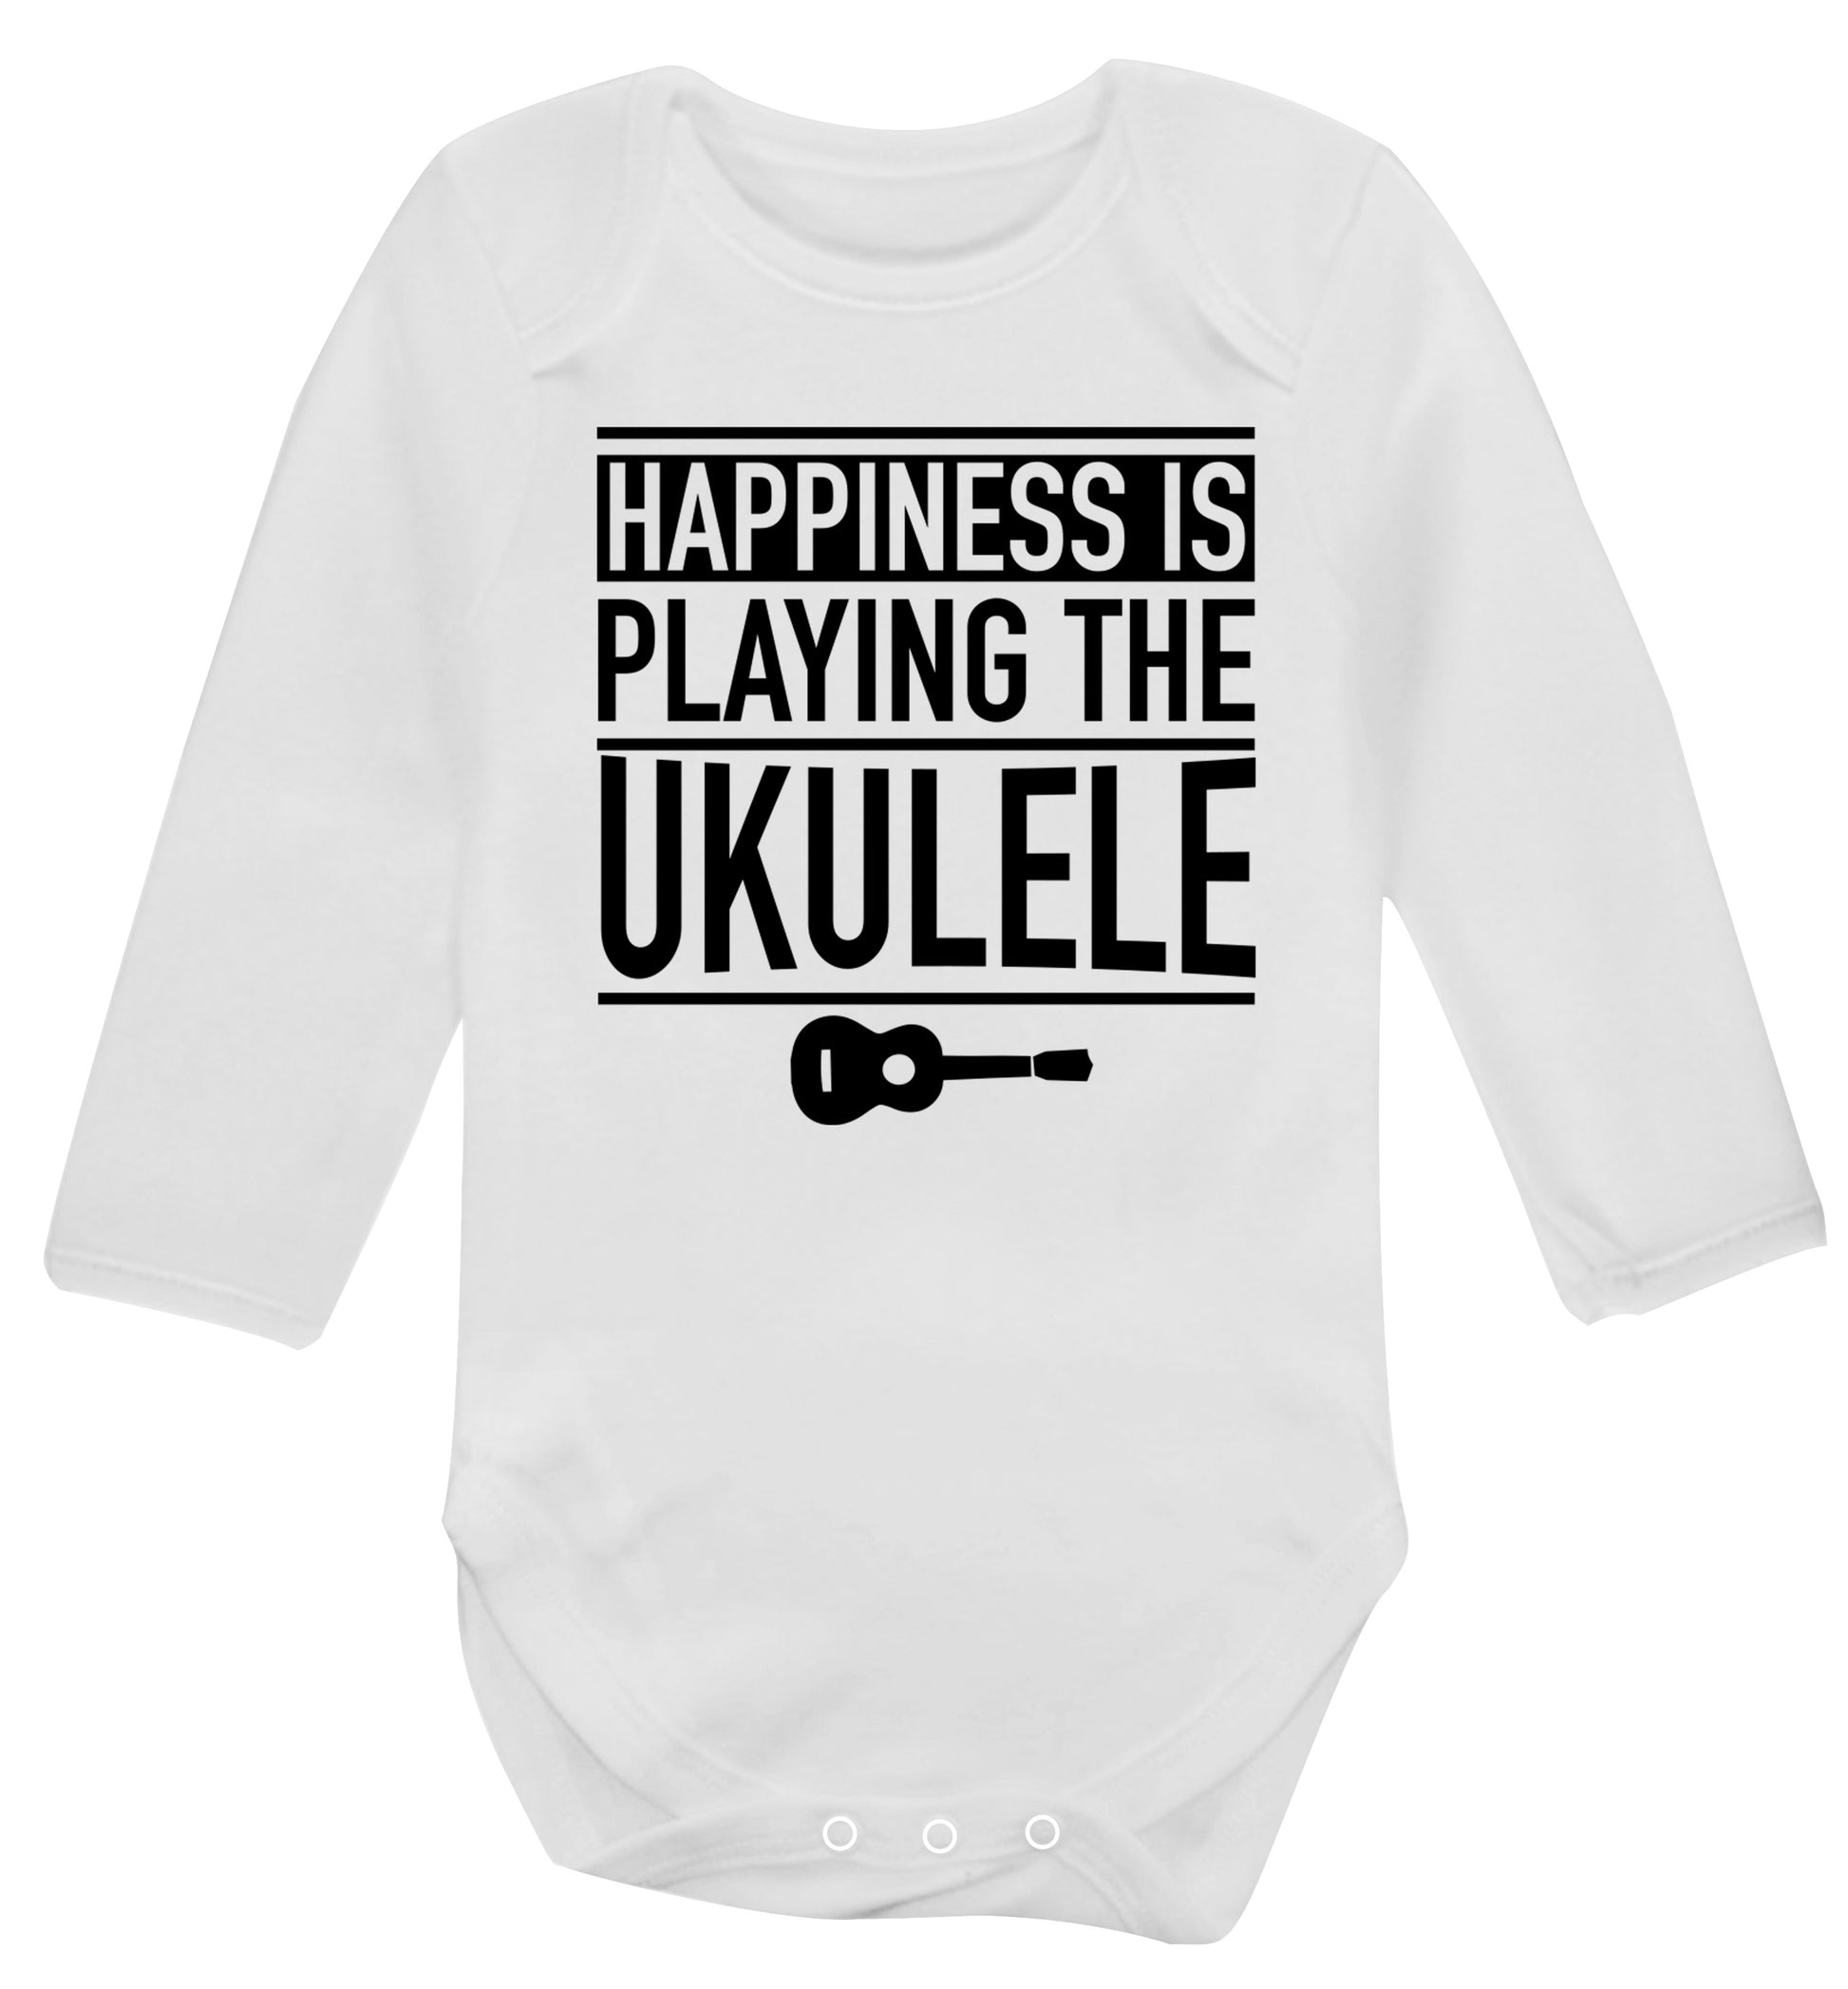 Happines is playing the ukulele Baby Vest long sleeved white 6-12 months